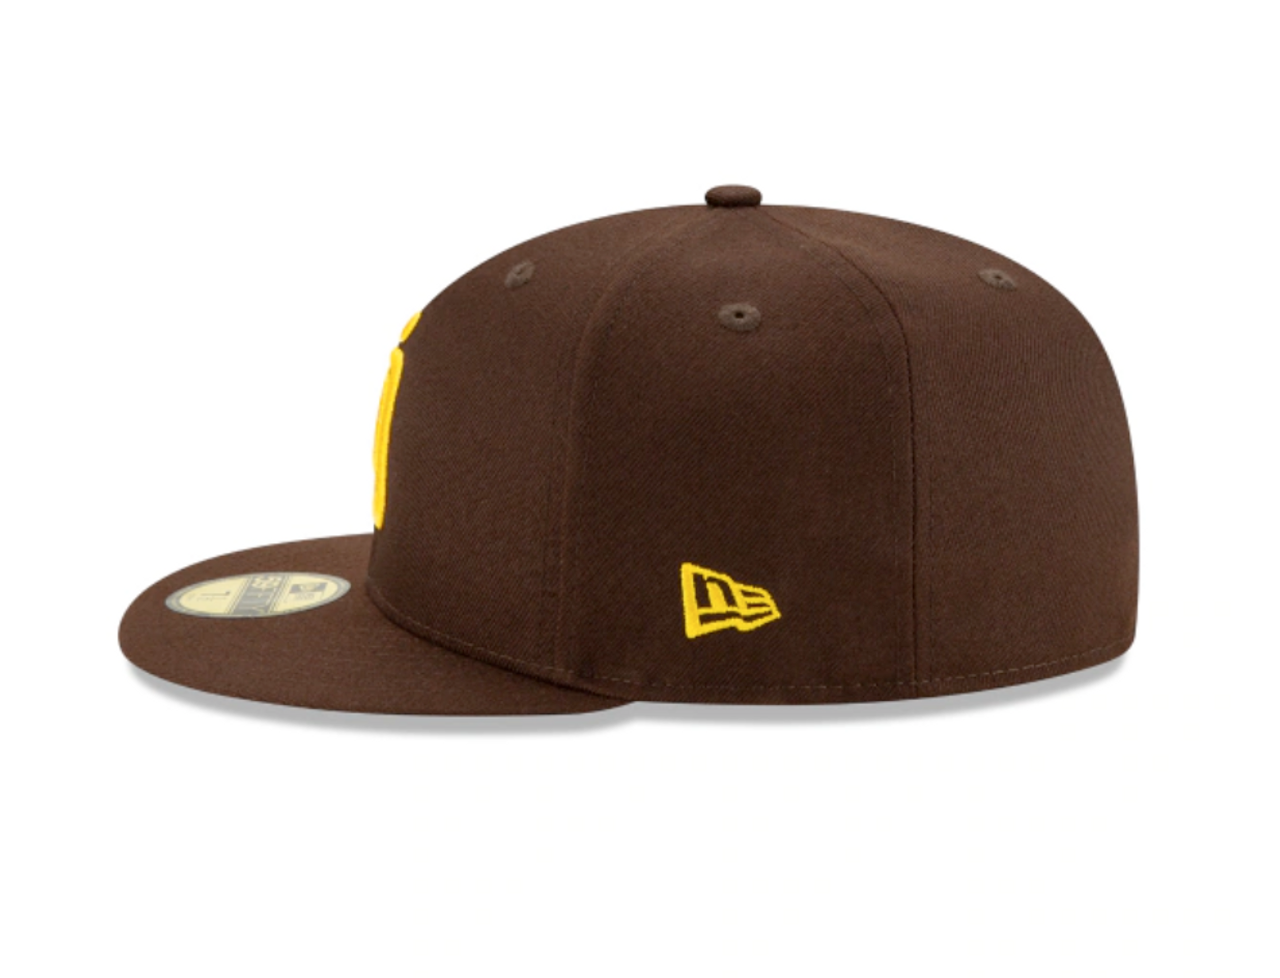 NEW ERA 59FIFTY MLB AUTHENTIC SAN DIEGO PADRES TEAM FITTED CAP